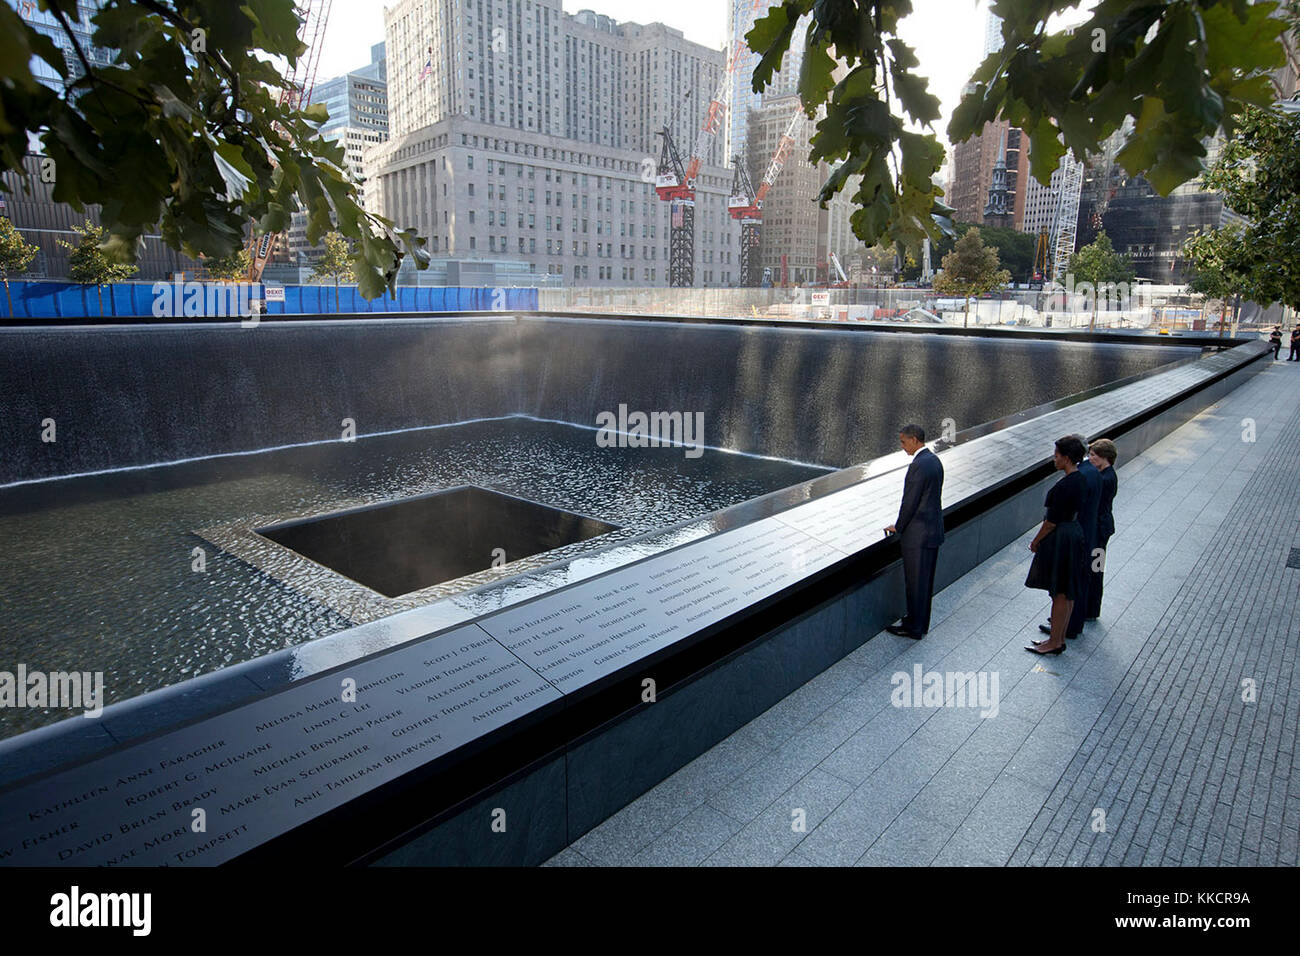 Sept. 11, 2011  President and First Lady, along with former President George W. Bush and former First Lady Laura Bush, paused at the North Memorial Pool of the National September 11 Memorial in New York City. The North Memorial pool sits in the footprint of the north tower, formerly 1 World Trade Center. Stock Photo